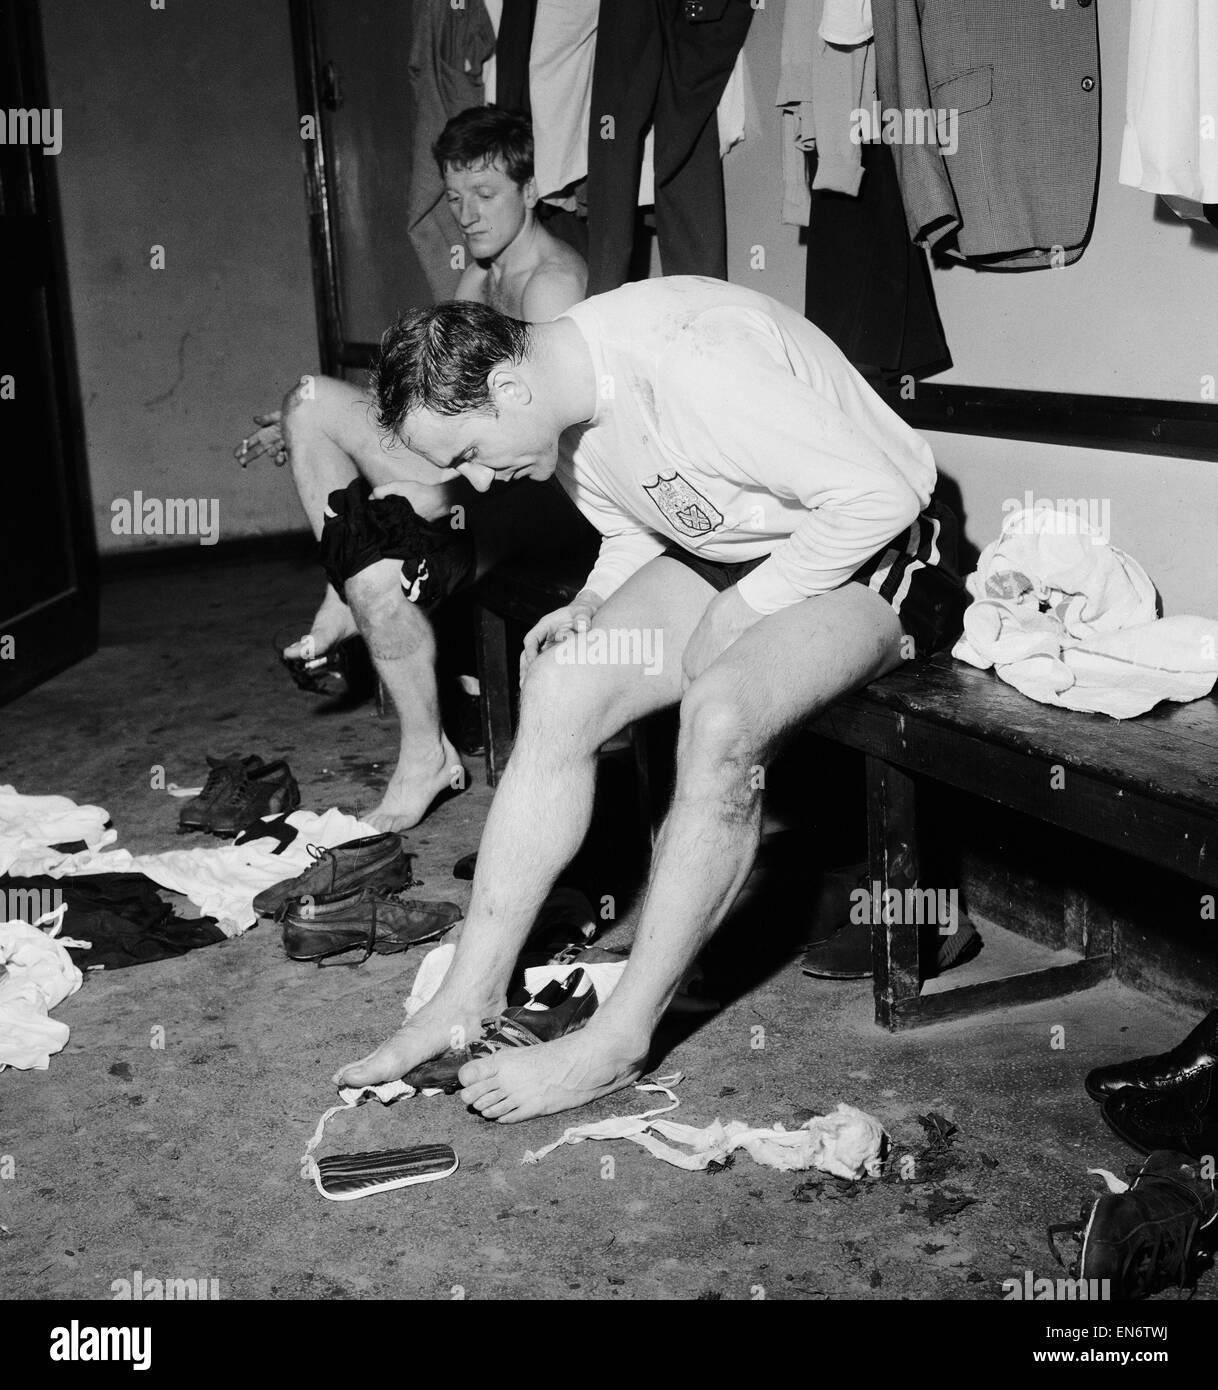 Fulham Reserves v. Metropolitan Police at Imber Court. George Cohen in the changing room after playing for the reserves. 25th November 1968. Stock Photo